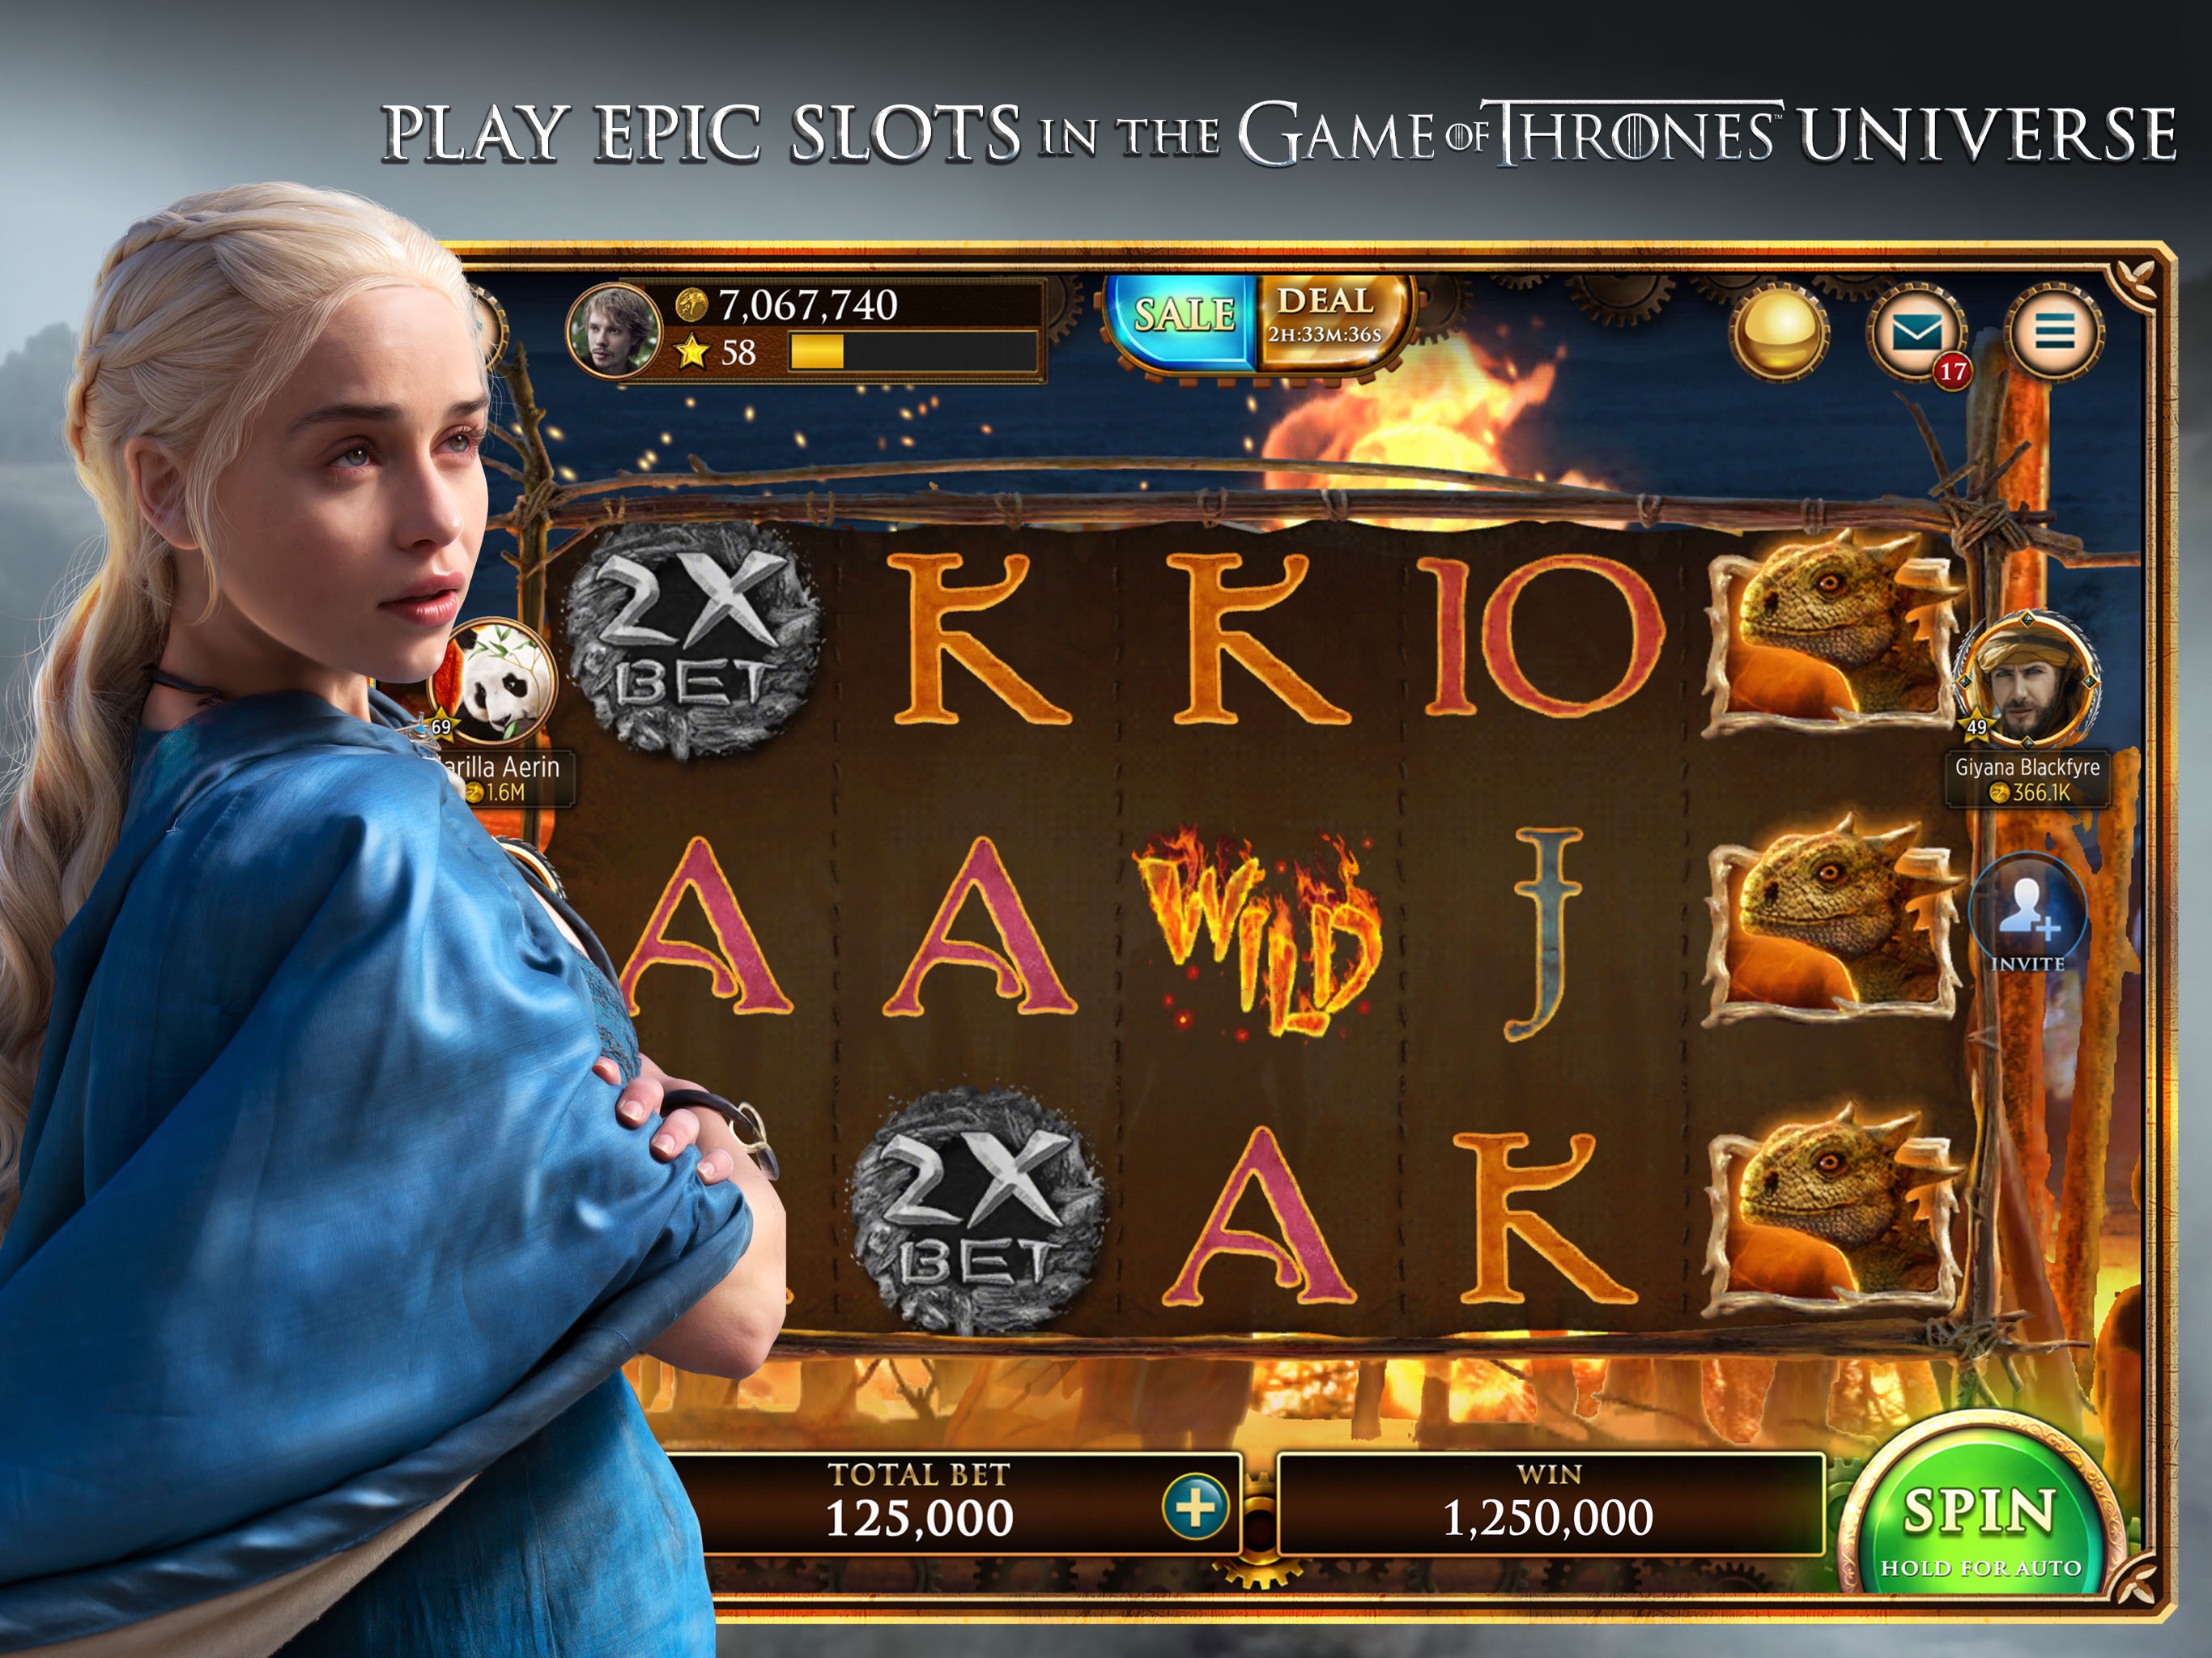 Game of thrones slots zynga free coins no download